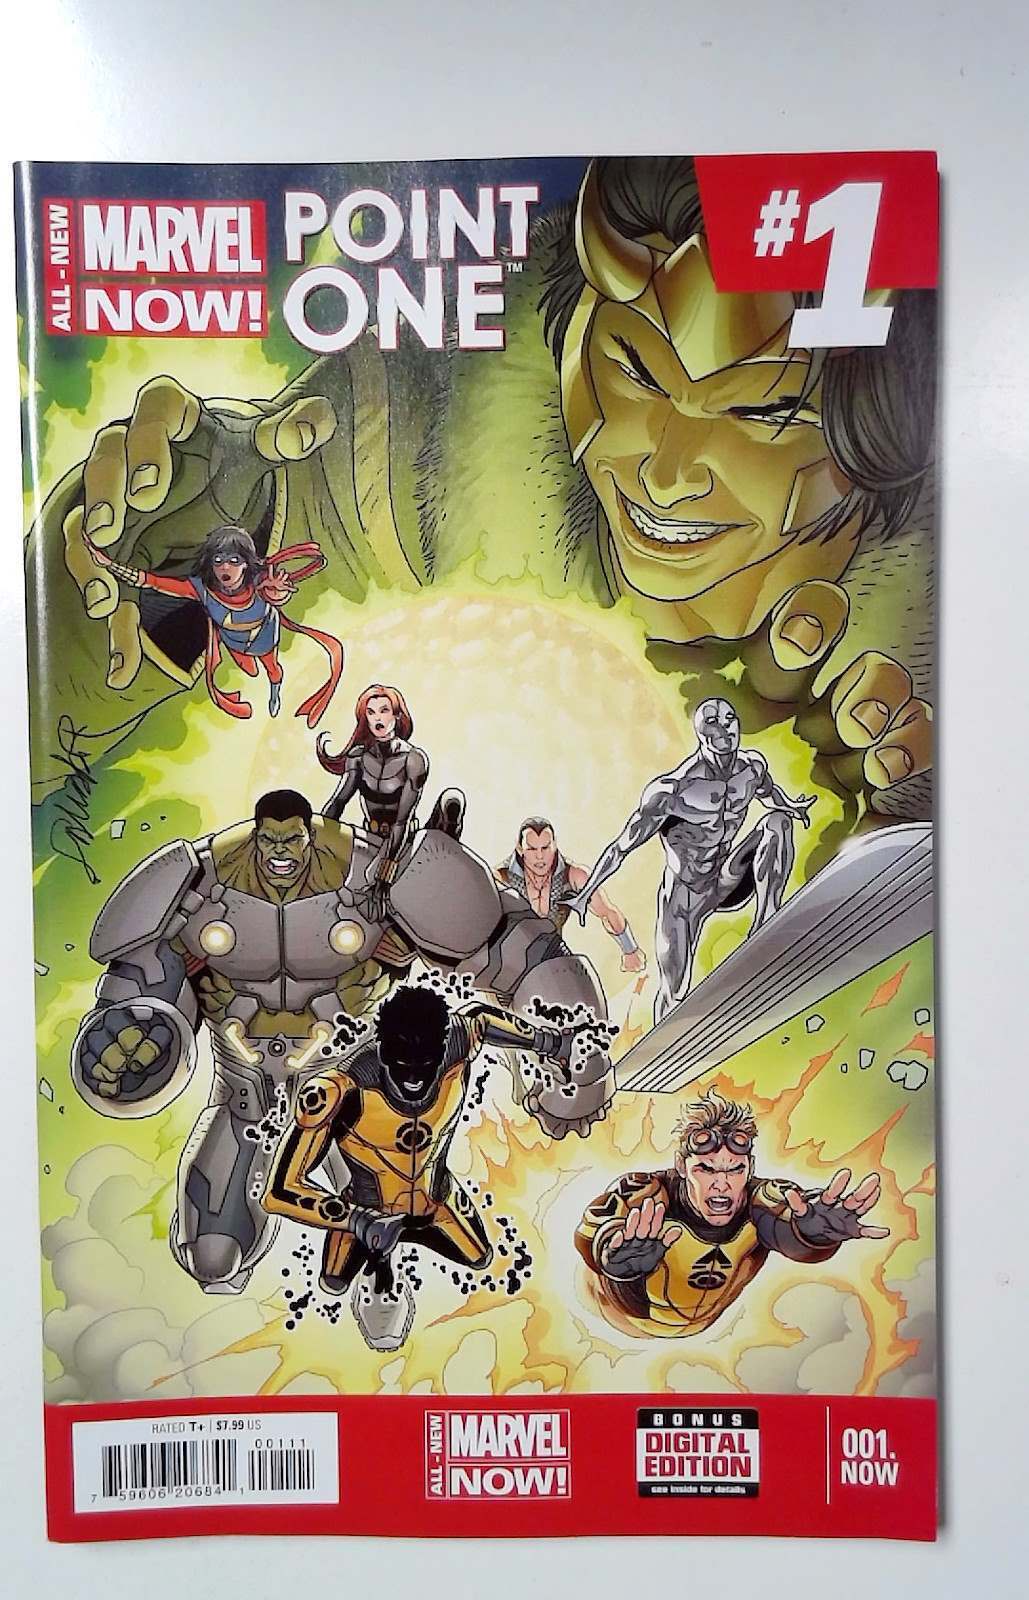 All-New Marvel Now Point One #1: Facsimile Edition #1 Marvel 2023 Reprint Comic